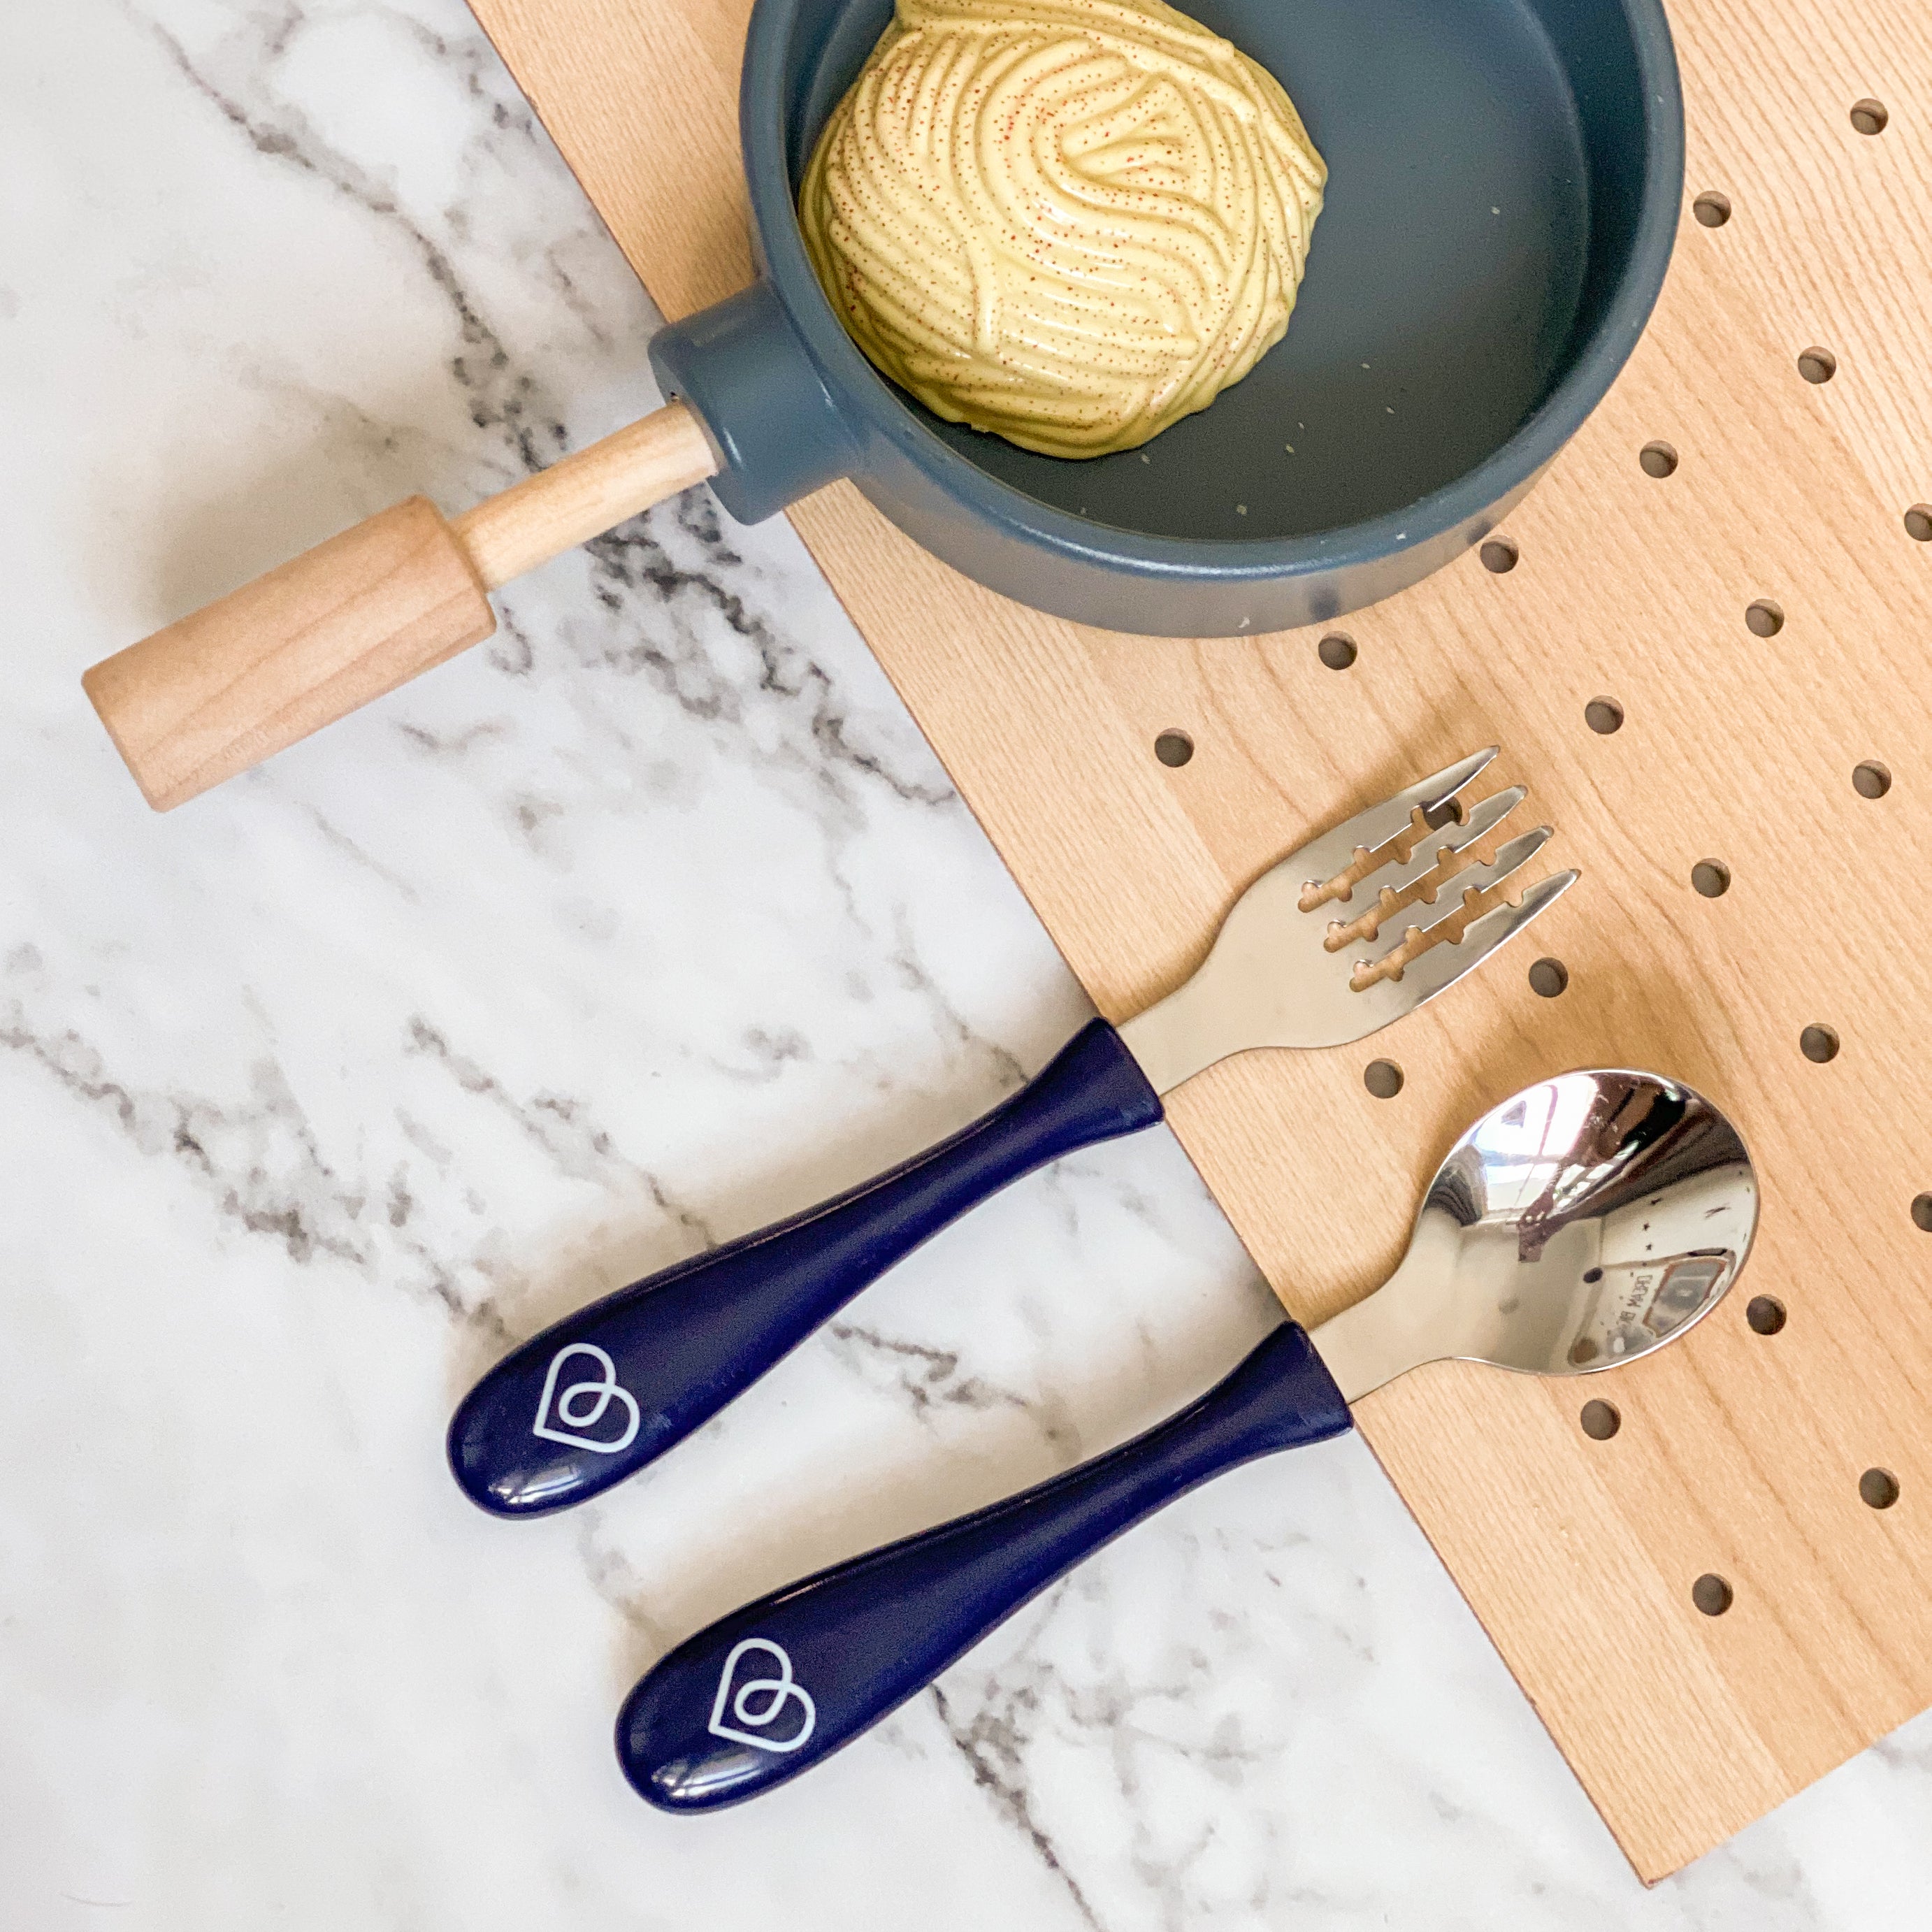 LoveAmme travel cutlery set displayed with pasta and chopping board